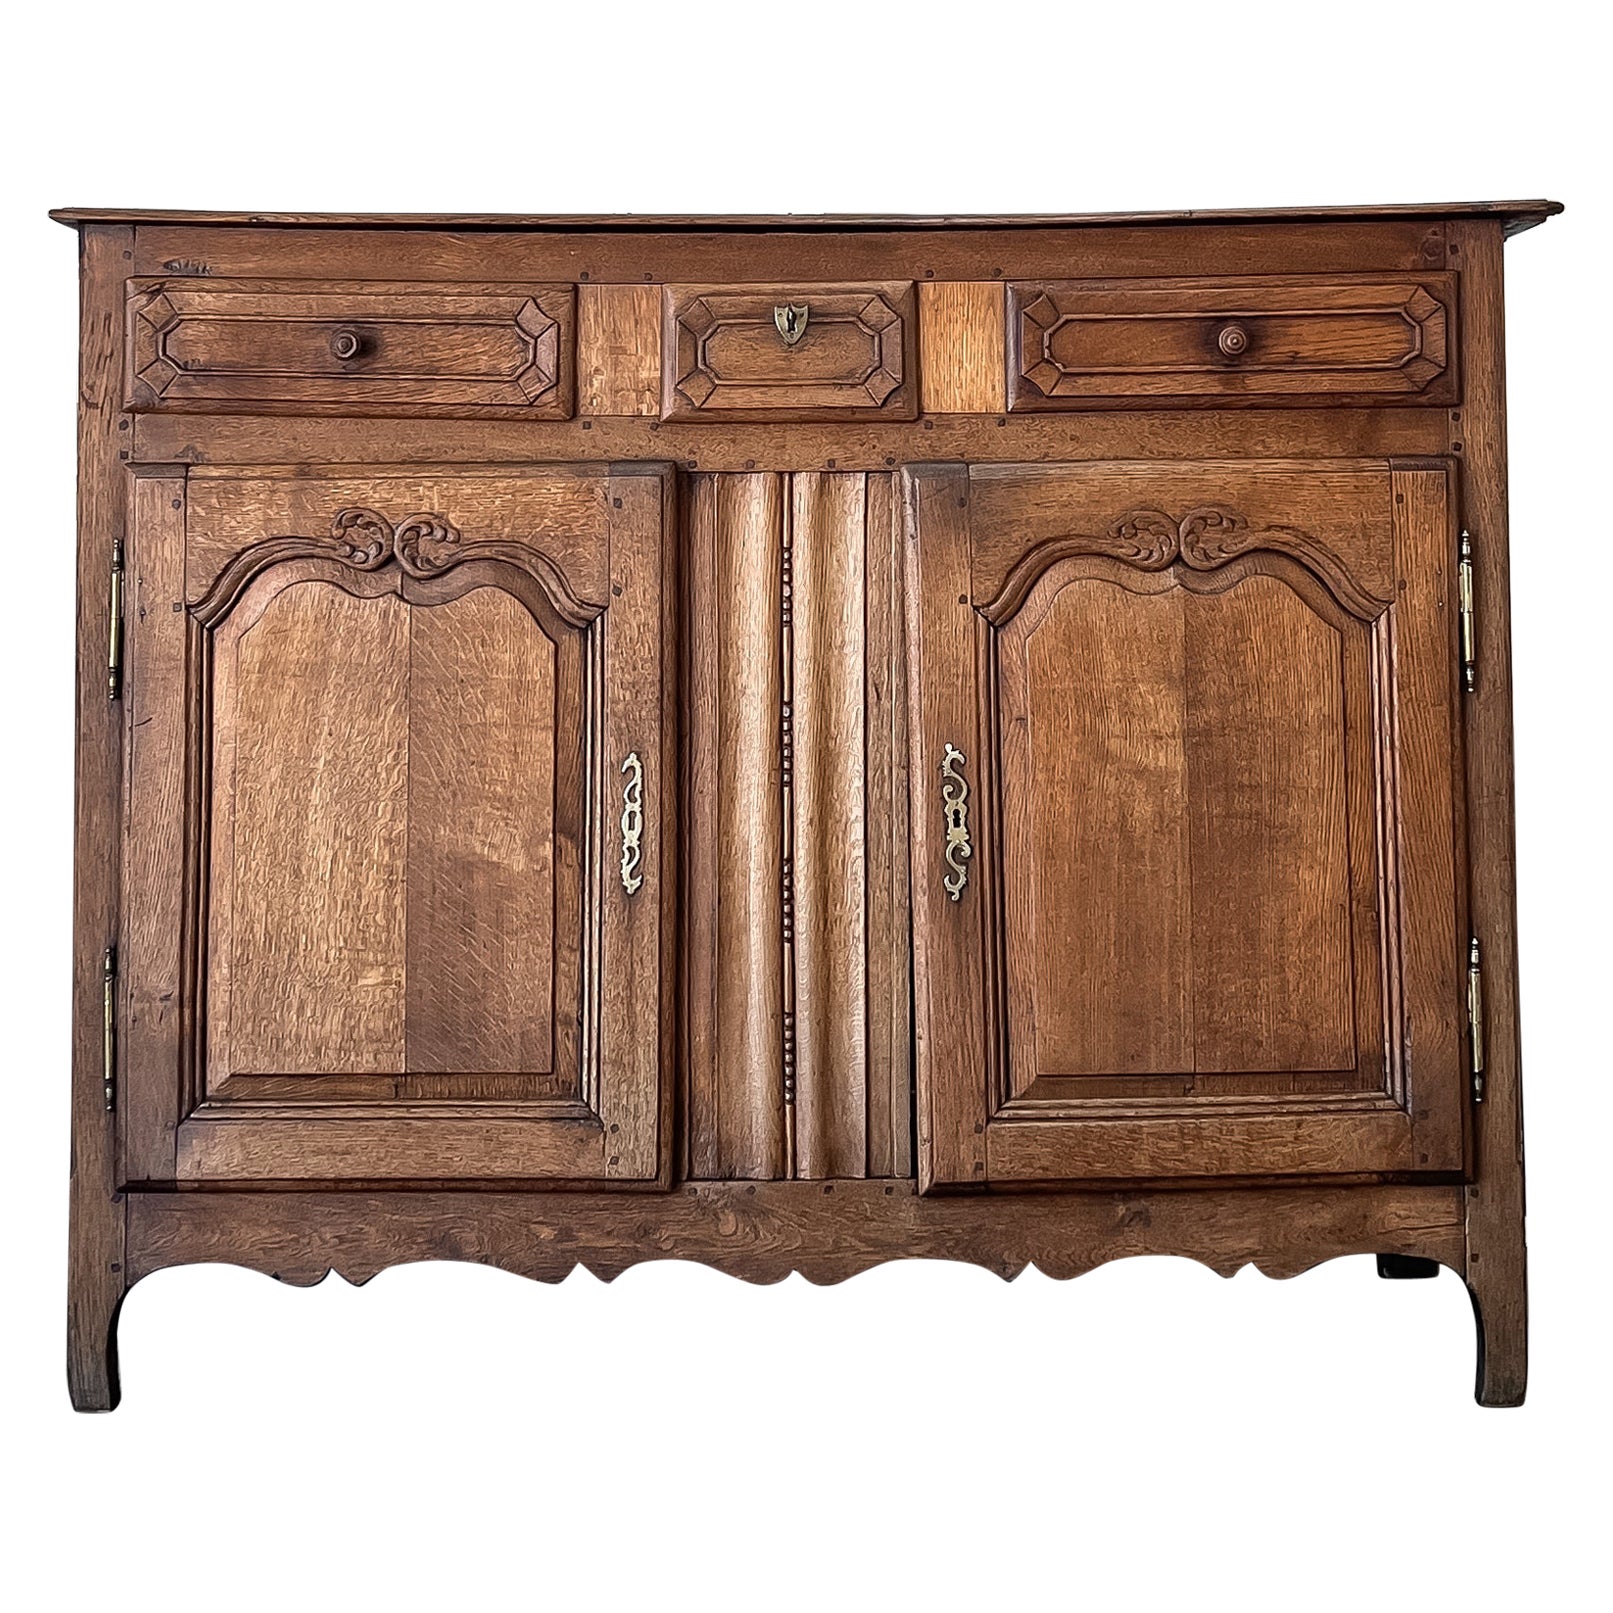 18th c. French Provincial Sideboard